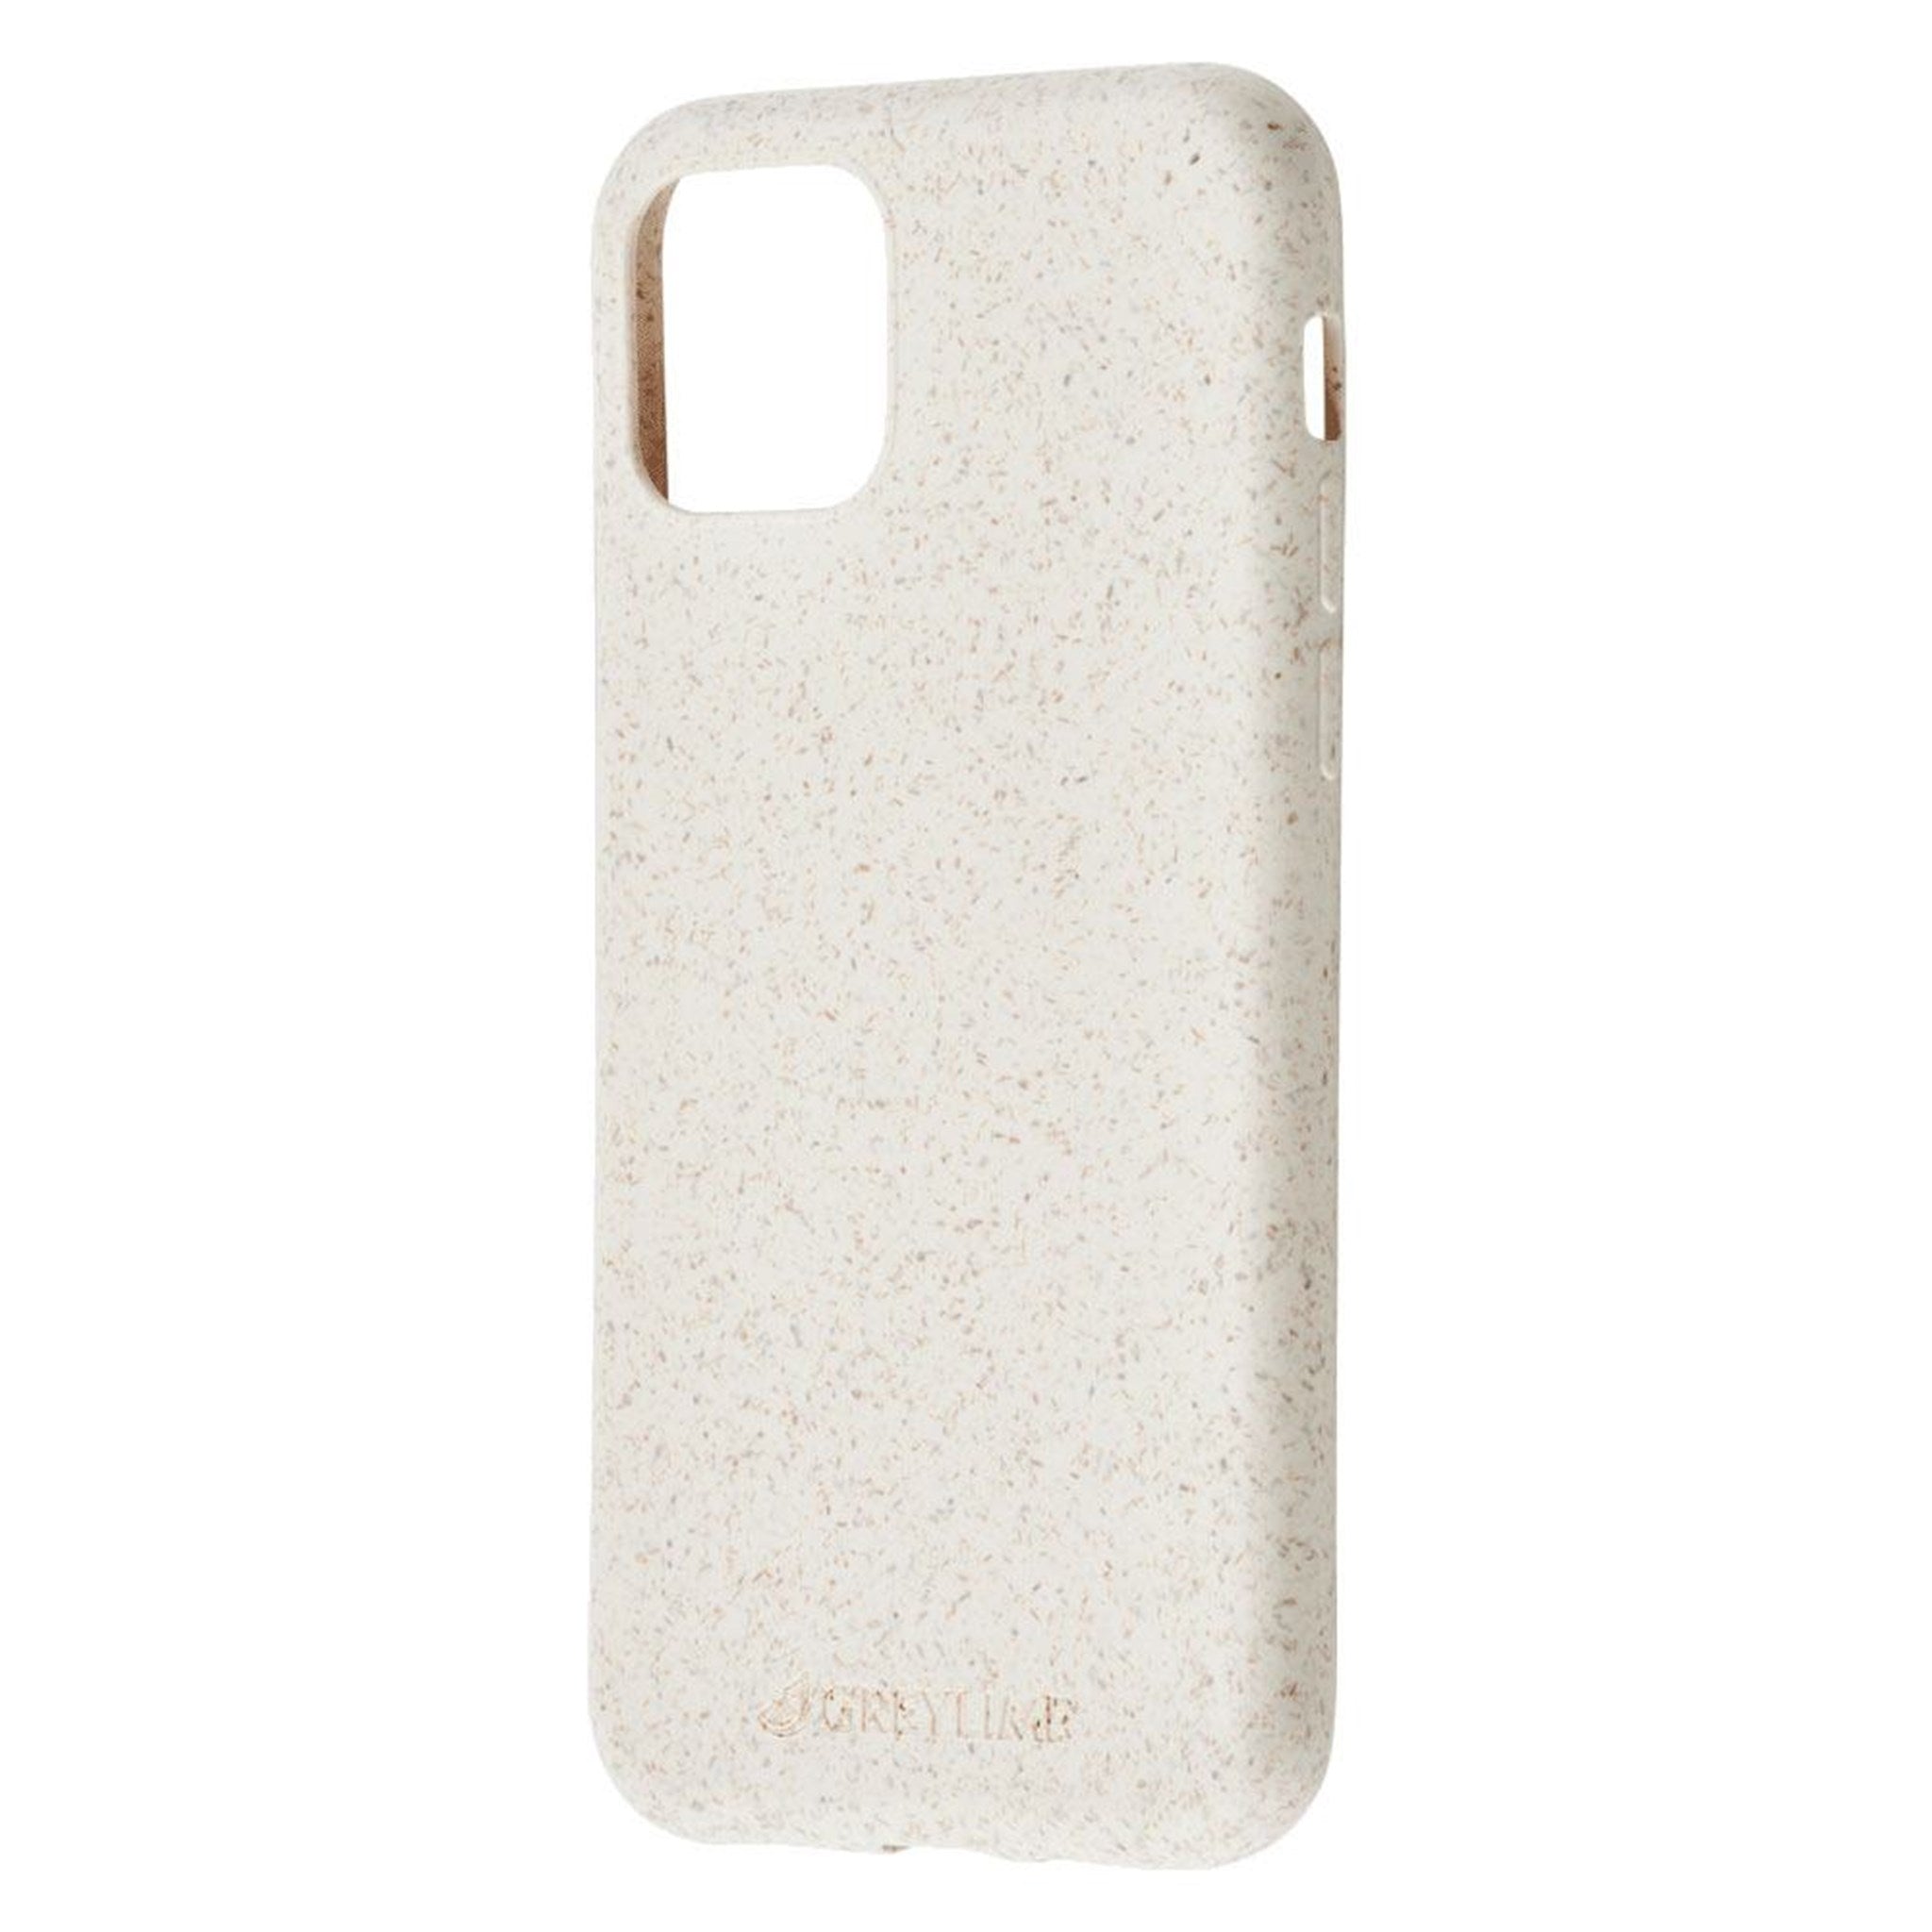 GreyLime-iPhone-11-Pro-Max-biodegradable-cover-Beige-COIP11PM02-V2.jpg